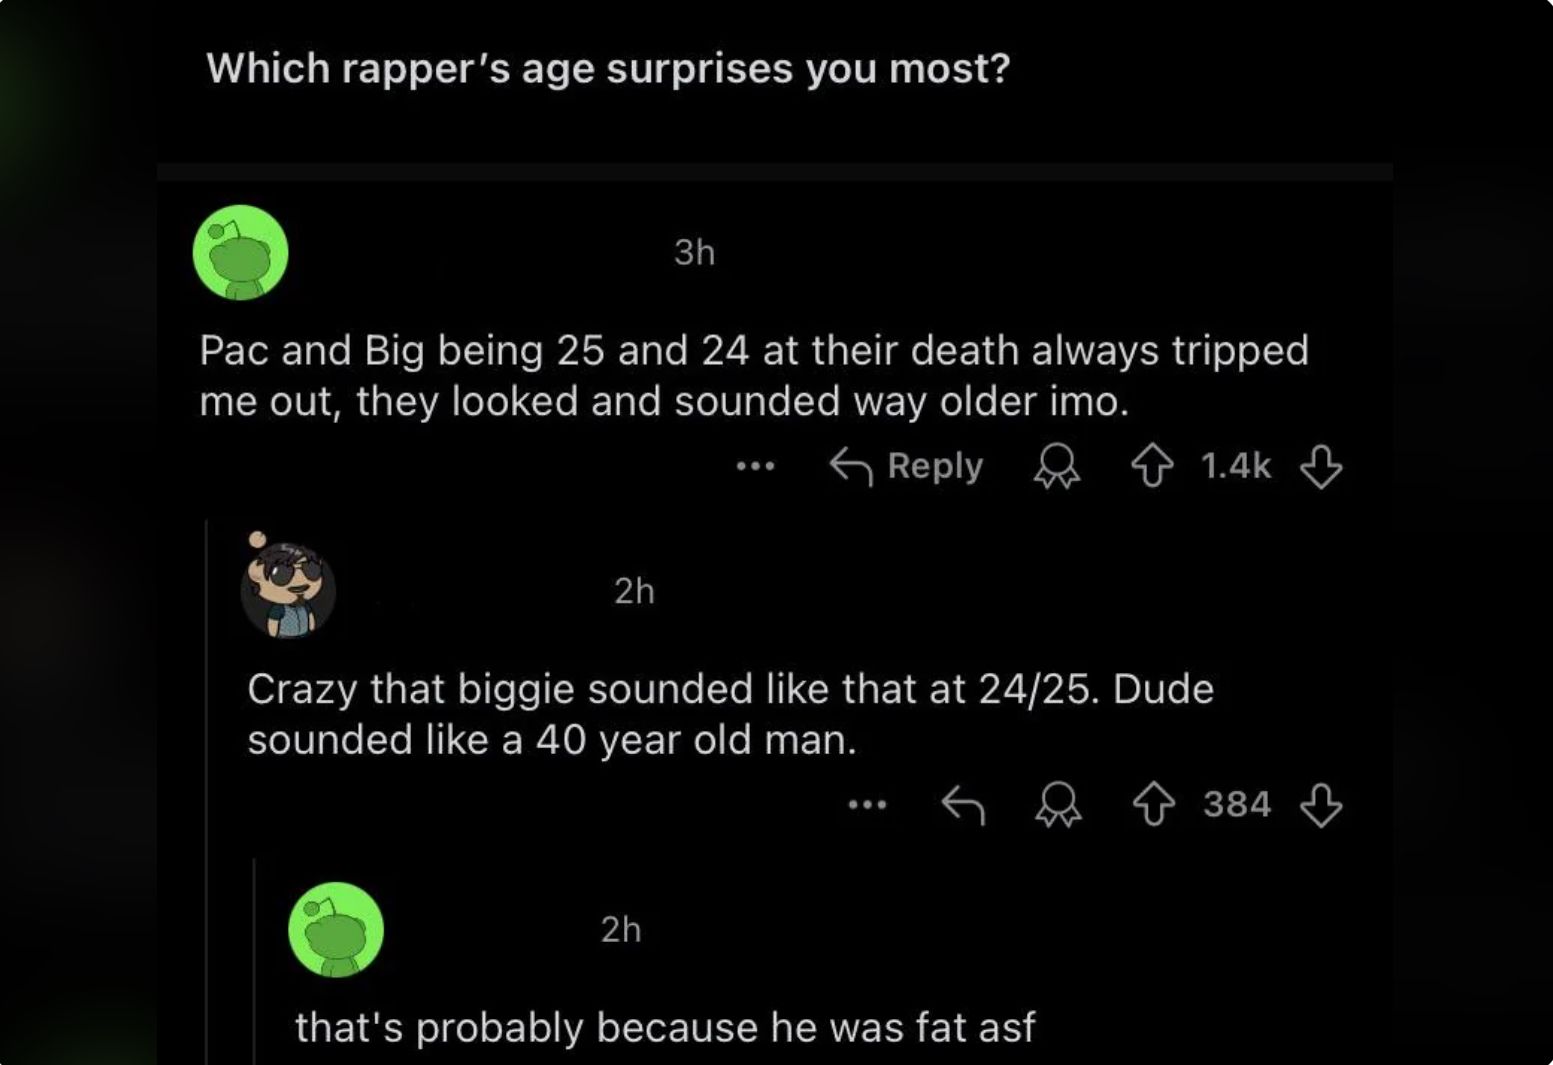 Which rapper's age surprises you most?
3h
Pac and Big being 25 and 24 at their death always tripped
me out, they looked and sounded way older imo.
Reply
2h
Crazy that biggie sounded like that at 24/25. Dude
sounded like a 40 year old man.
2h
that's probably because he was fat asf
1.4k
384